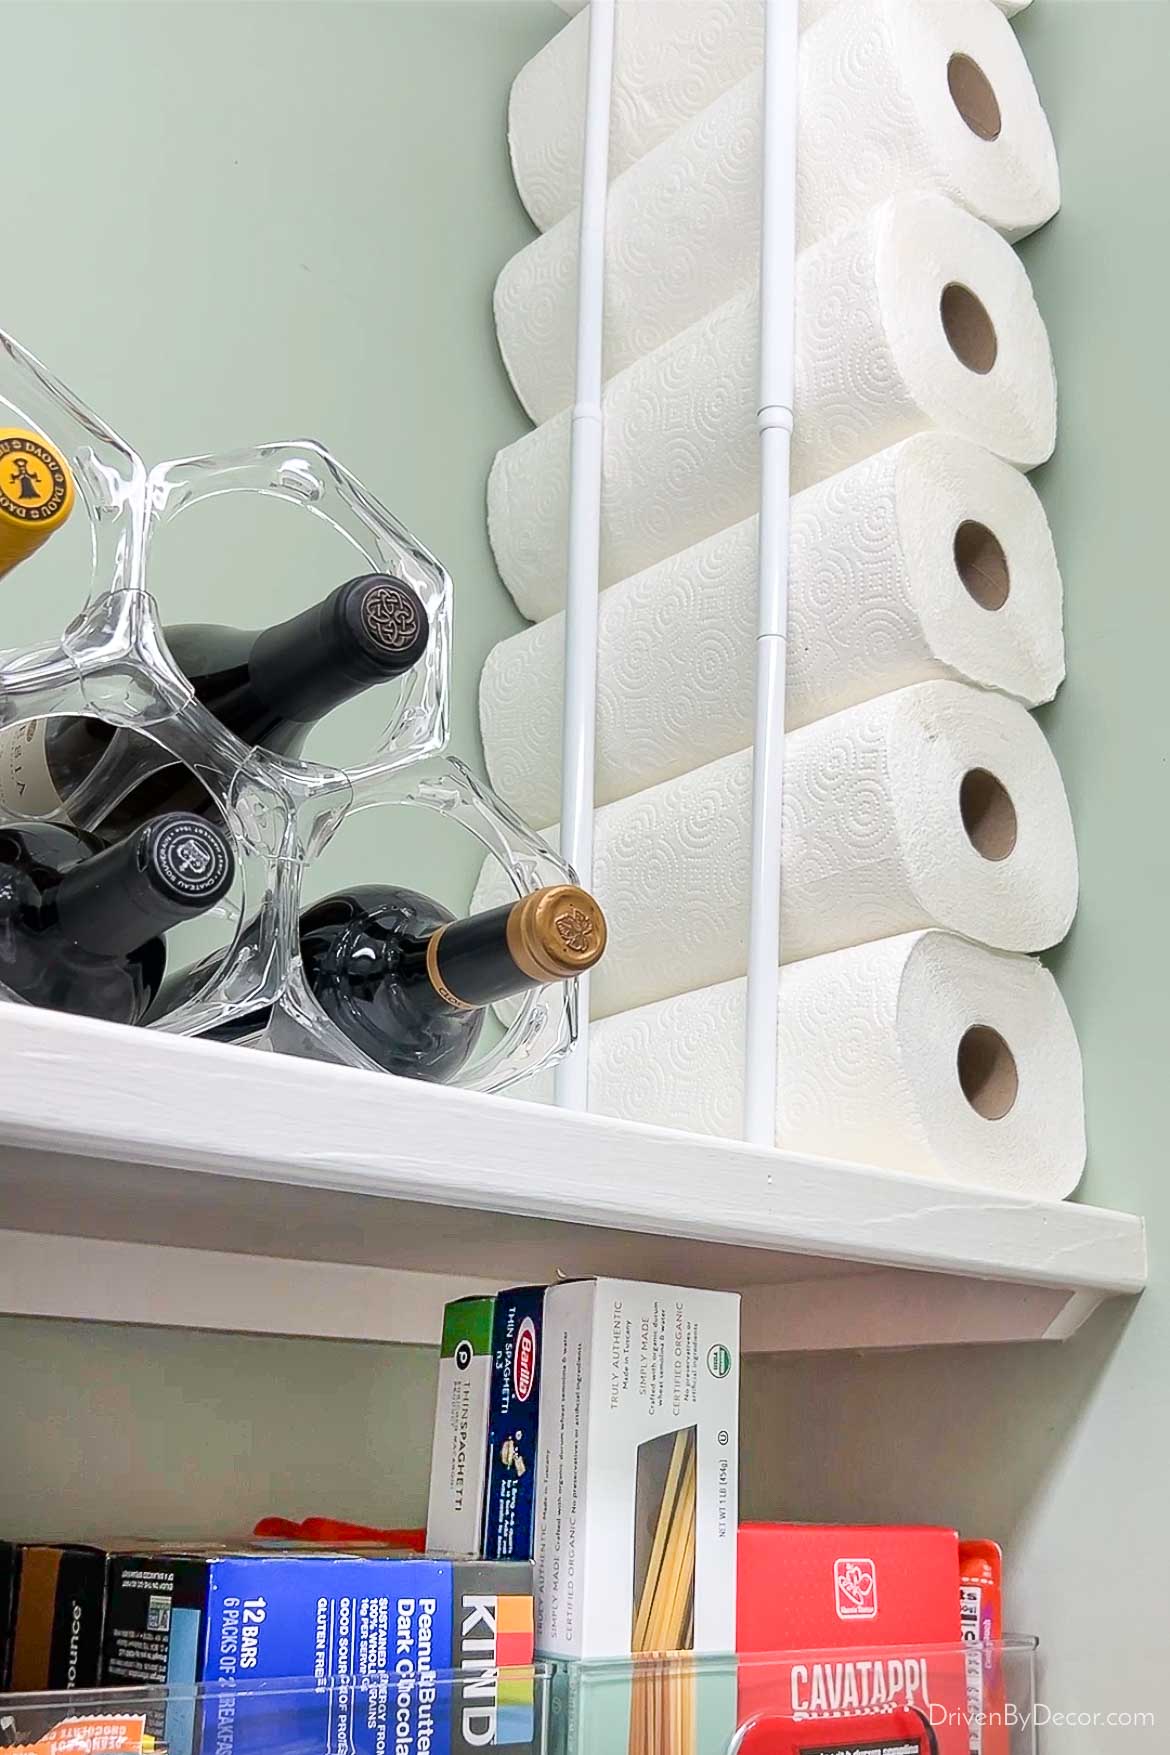 Paper towels stored vertically with use of tension rods